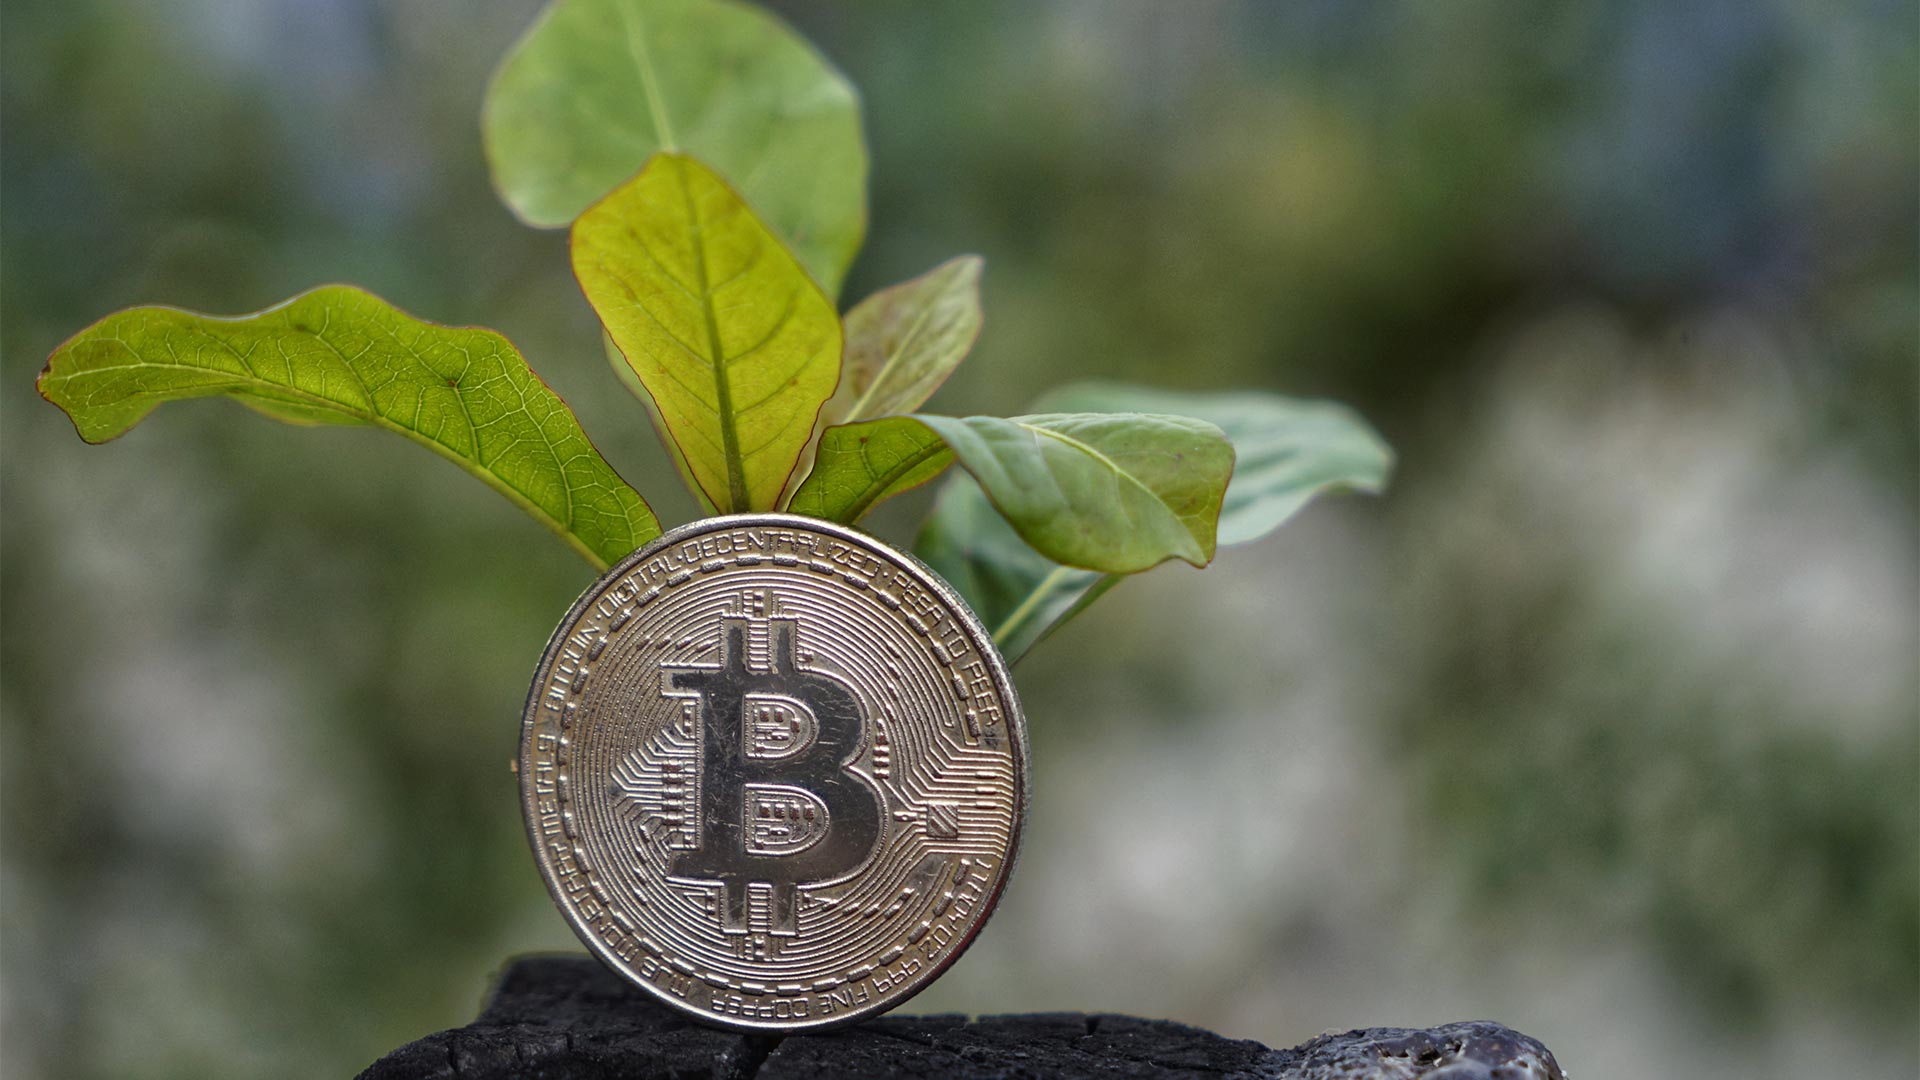 Bitcoin in front of a sapling